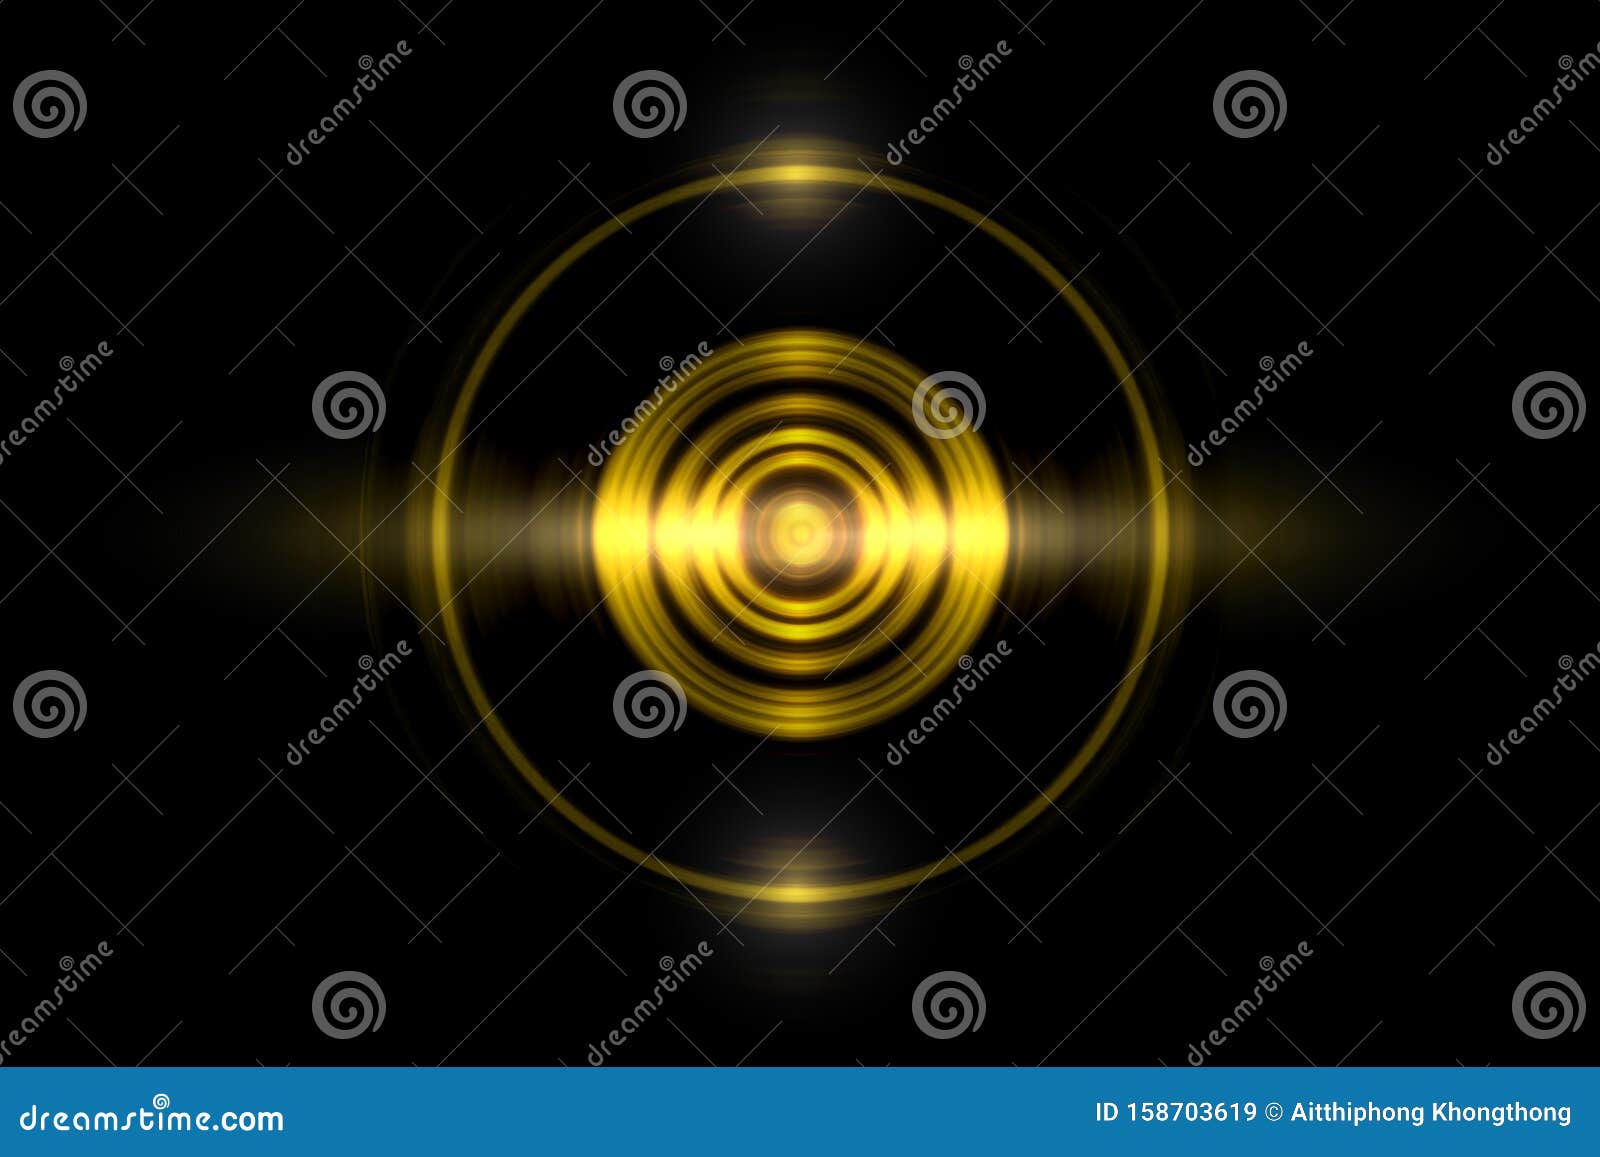 Ring with light effects and abstract background Vector Image